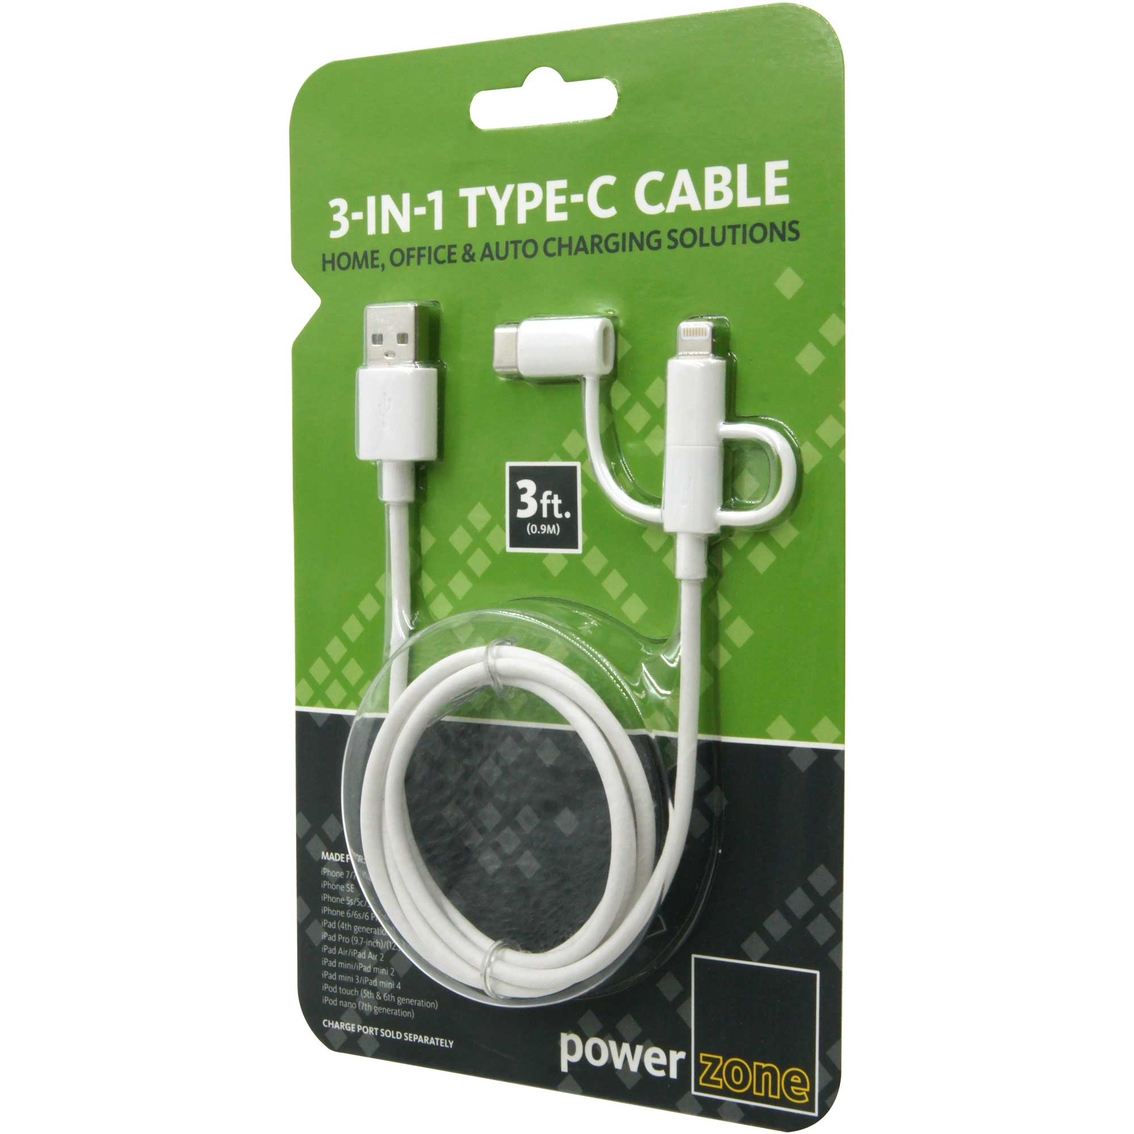 Powerzone 3-in-1 Type C Cable 3 ft. - Image 3 of 5